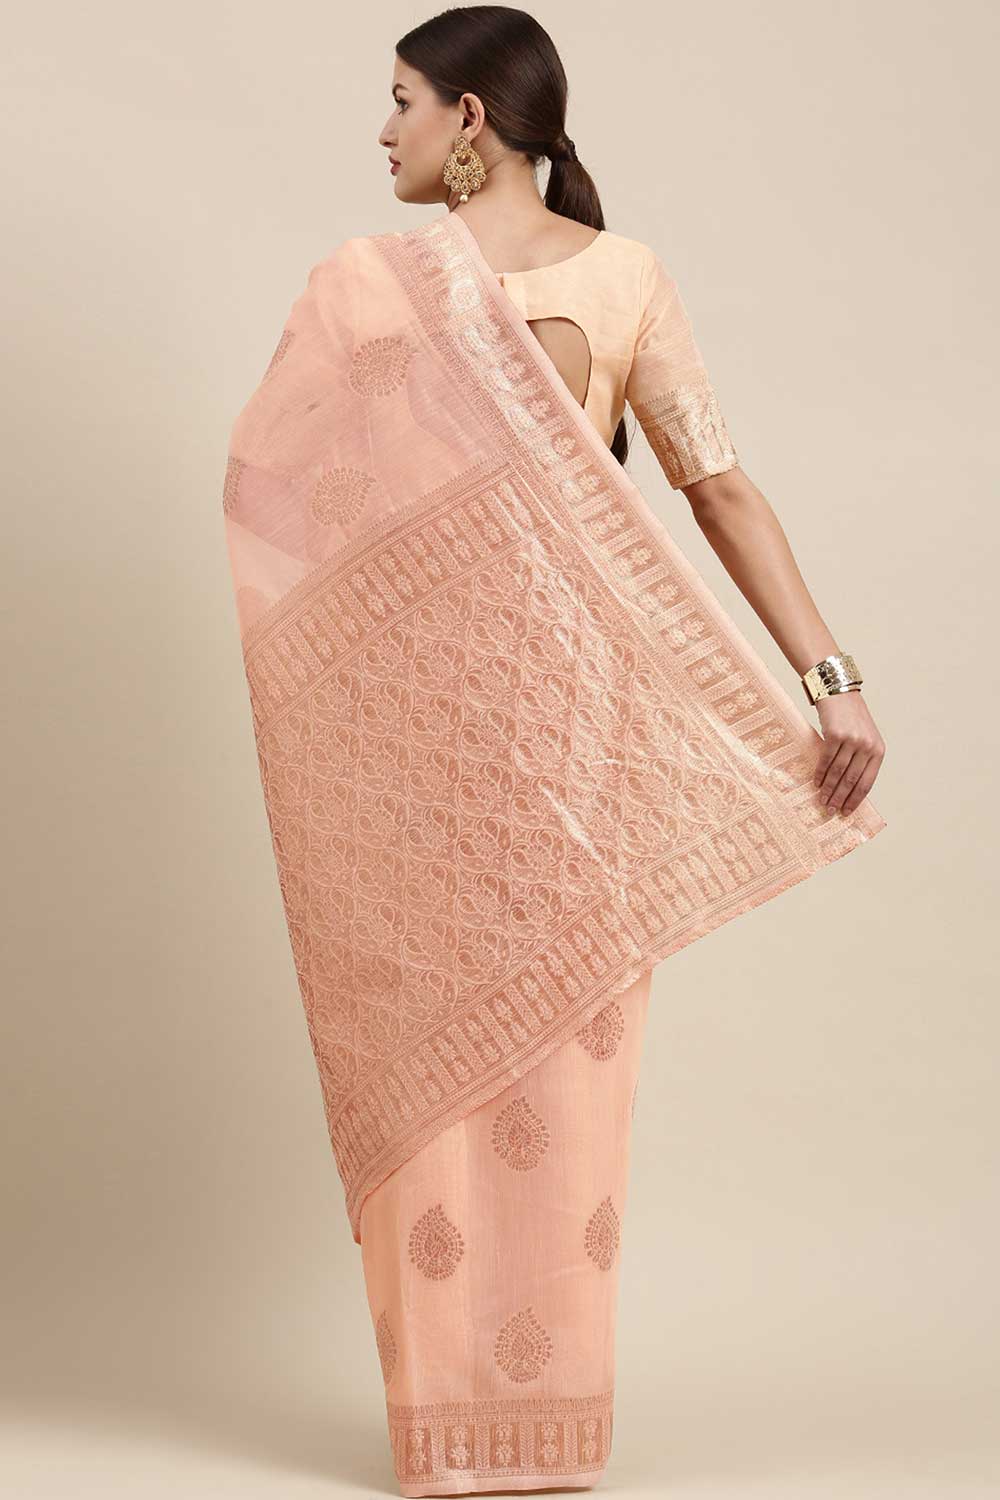 Shop Chaya Peach Bagh Blended Linen One Minute Saree at best offer at our  Store - One Minute Saree